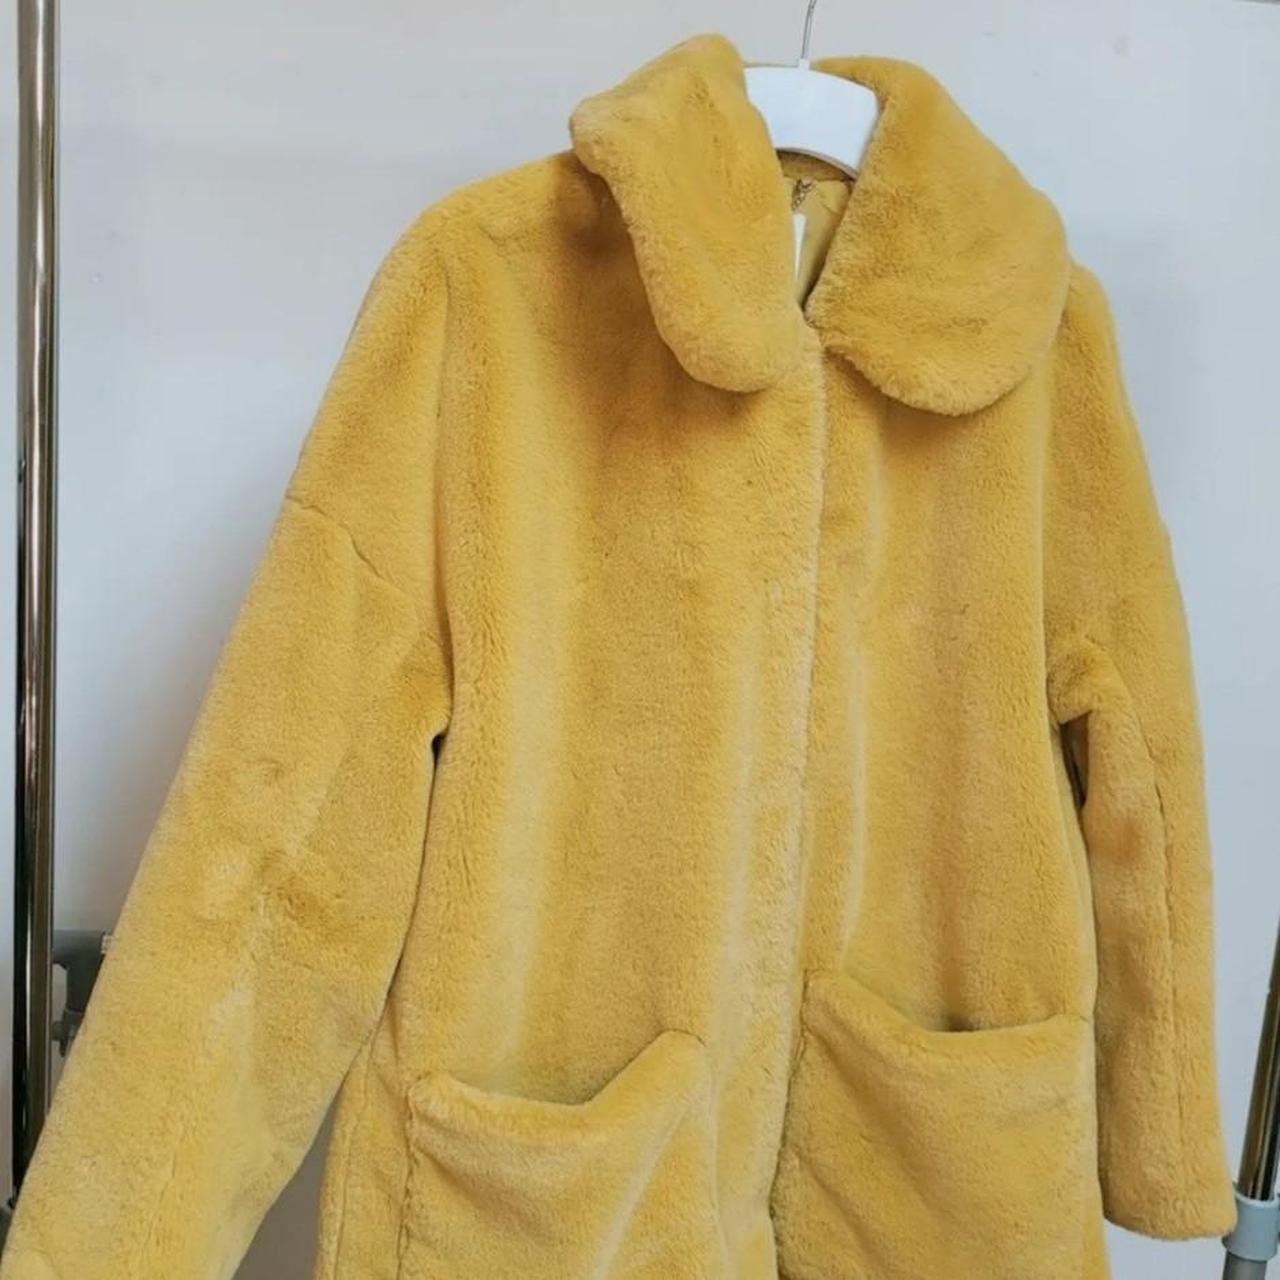 Yellow h&m faux fur coat with a rounded collar and... - Depop